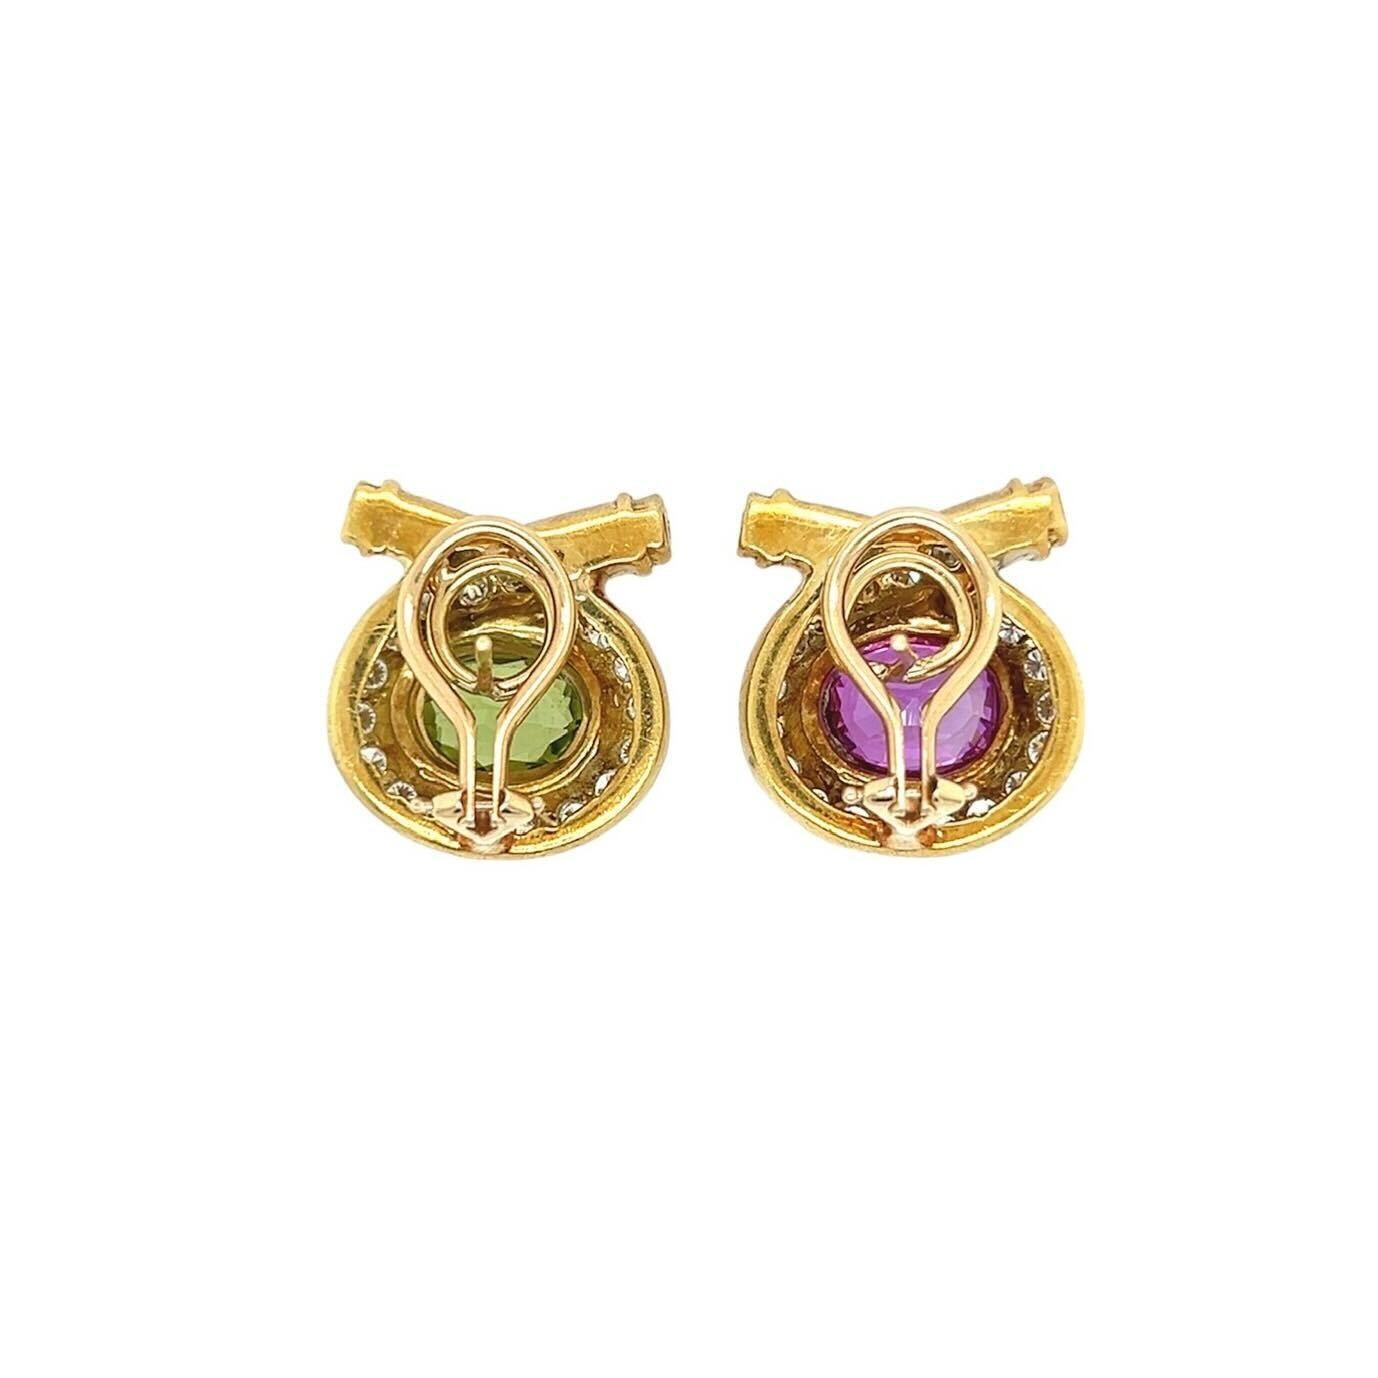 A pair of 18 karat yellow and white gold, peridot, pink tourmaline and diamond earrings.  The first yellow gold earring centering a bezel set oval faceted peridot measuring approximately 8.72 x 6.43 mm within a crossover surround of approximately